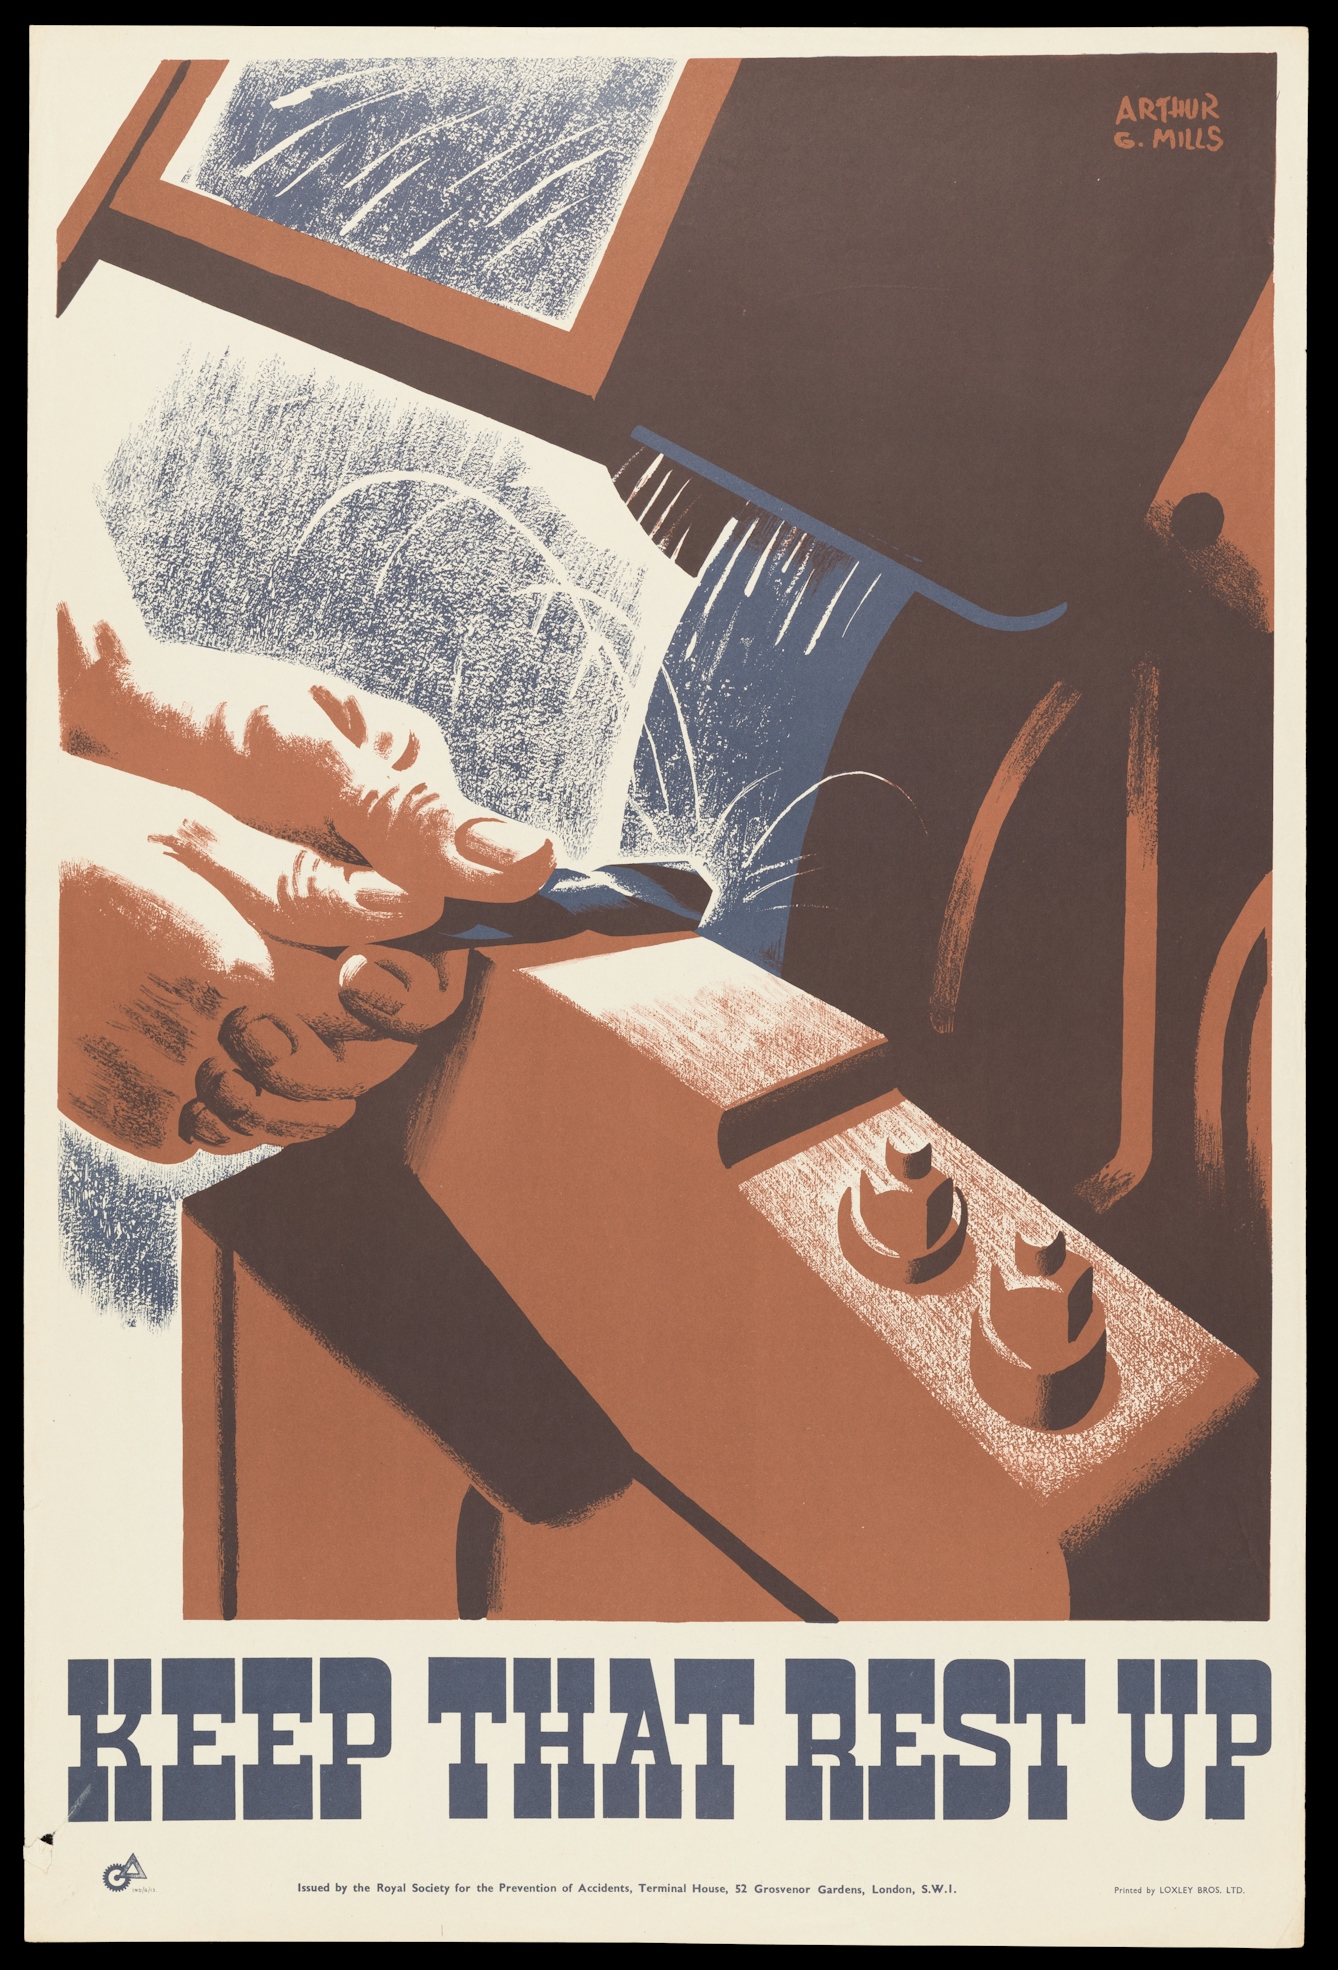 Print work of a pair of hands sharpening a rod on a lathe.